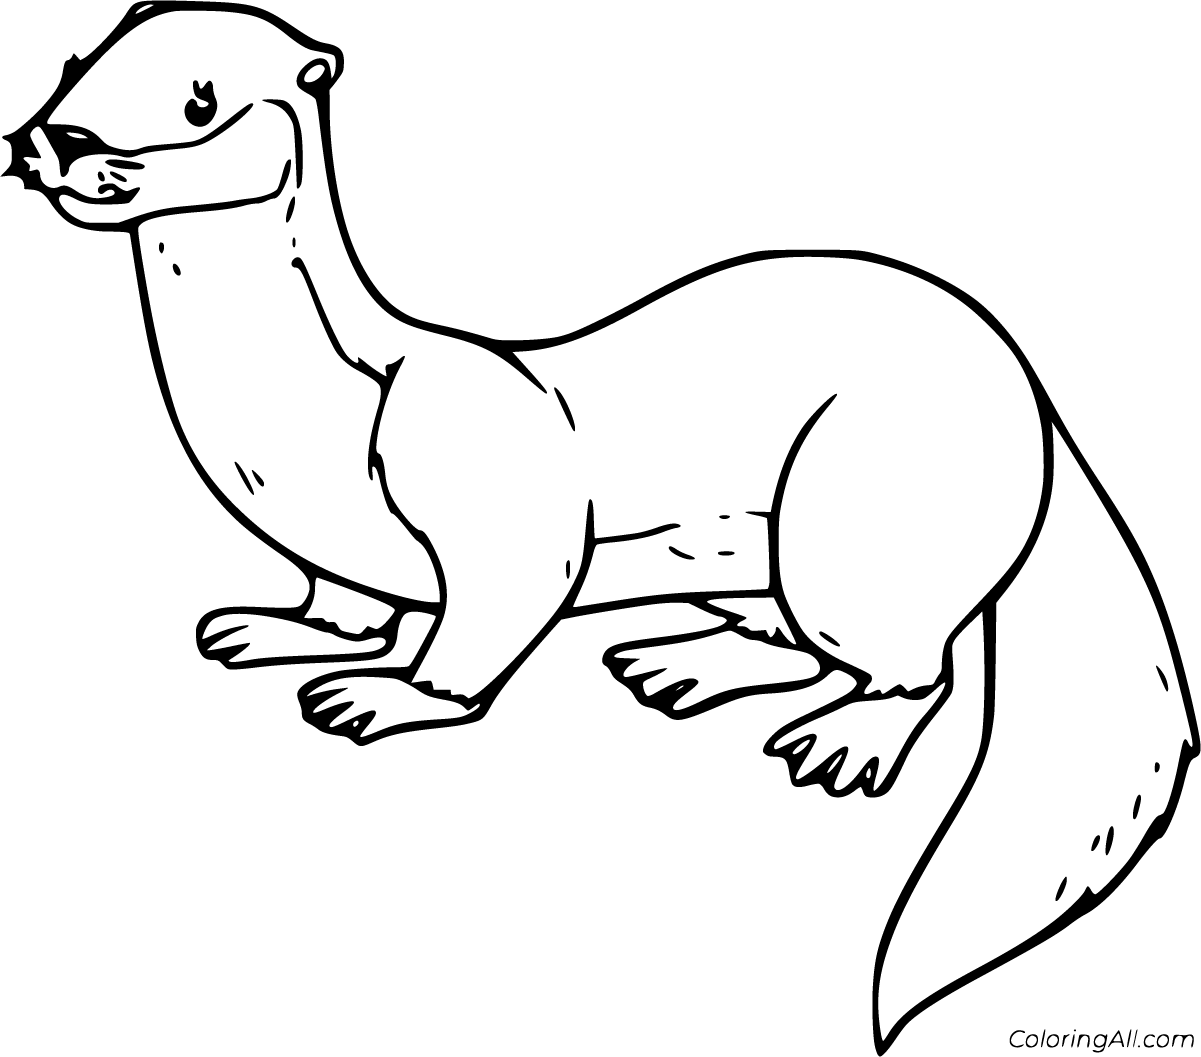 Marten Coloring Pages - ColoringAll